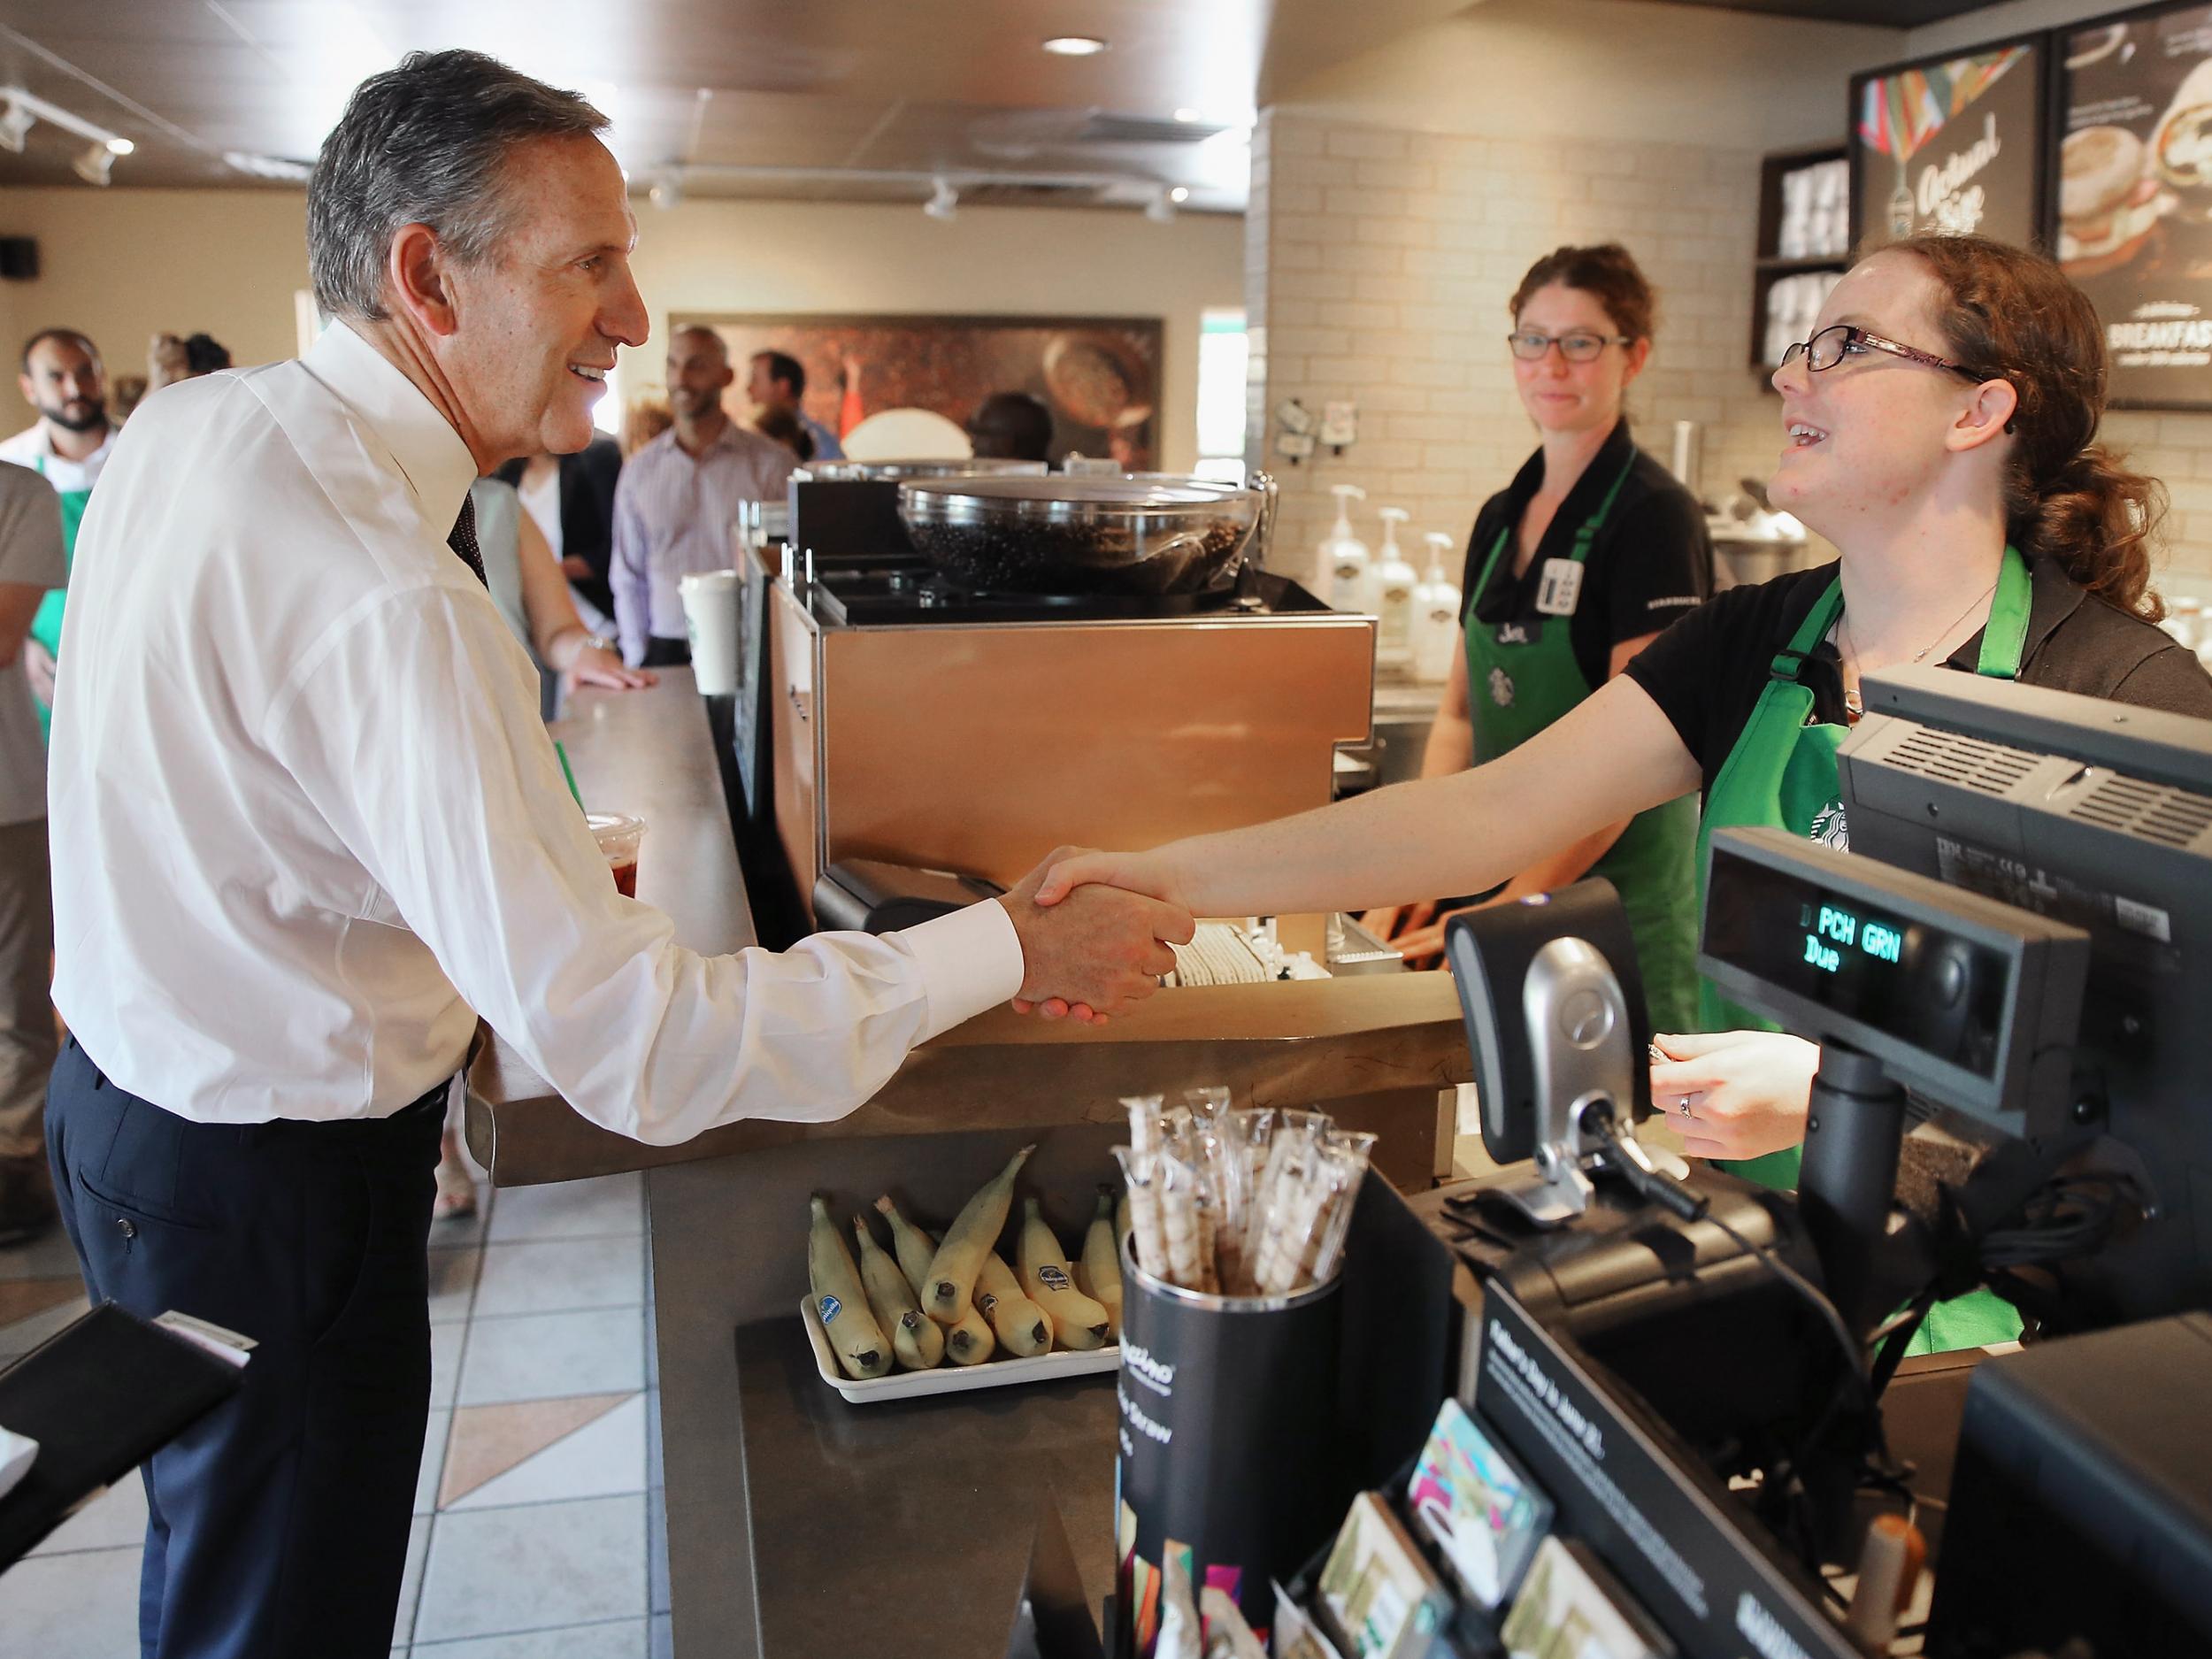 Starbucks CEO Howard Schultz greets employees and others at the coffee shop